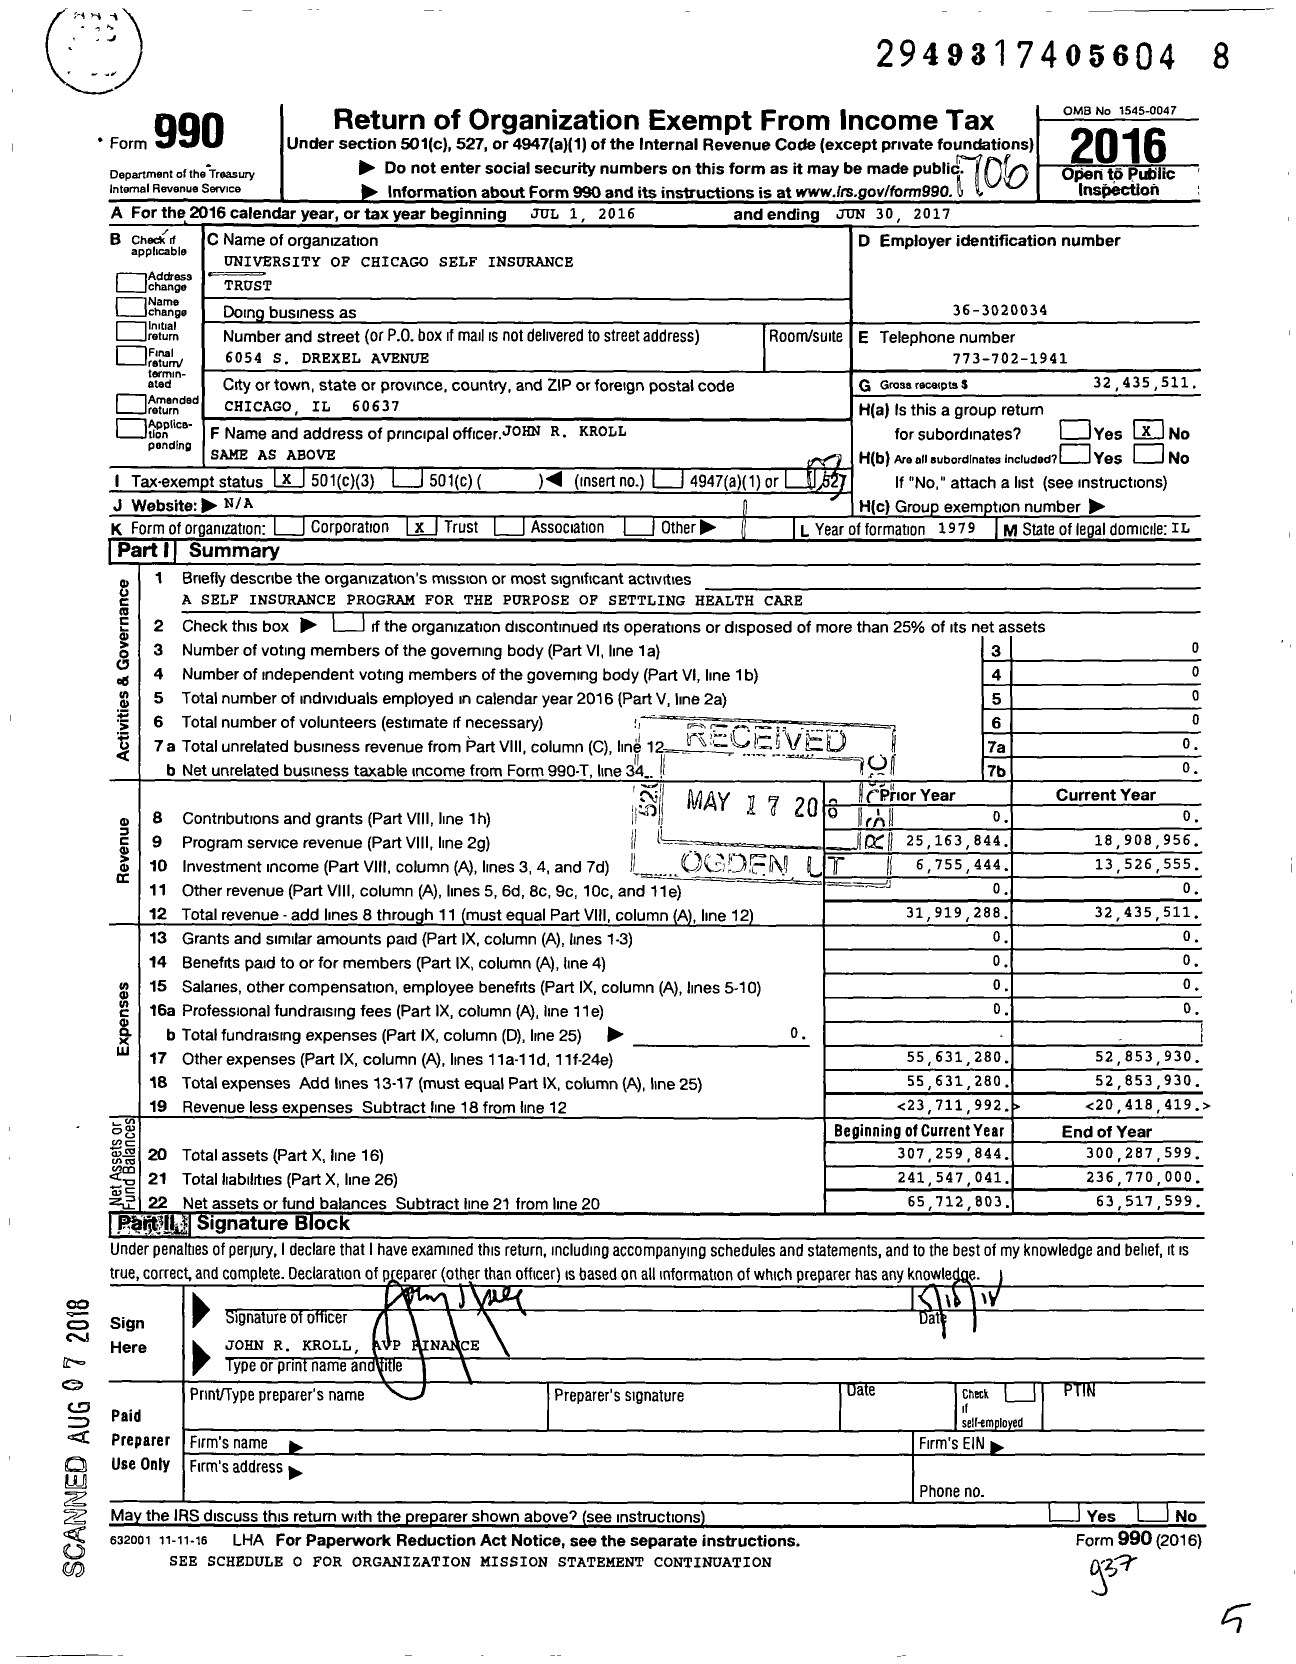 Image of first page of 2016 Form 990 for University of Chicago Self Insurance Trust